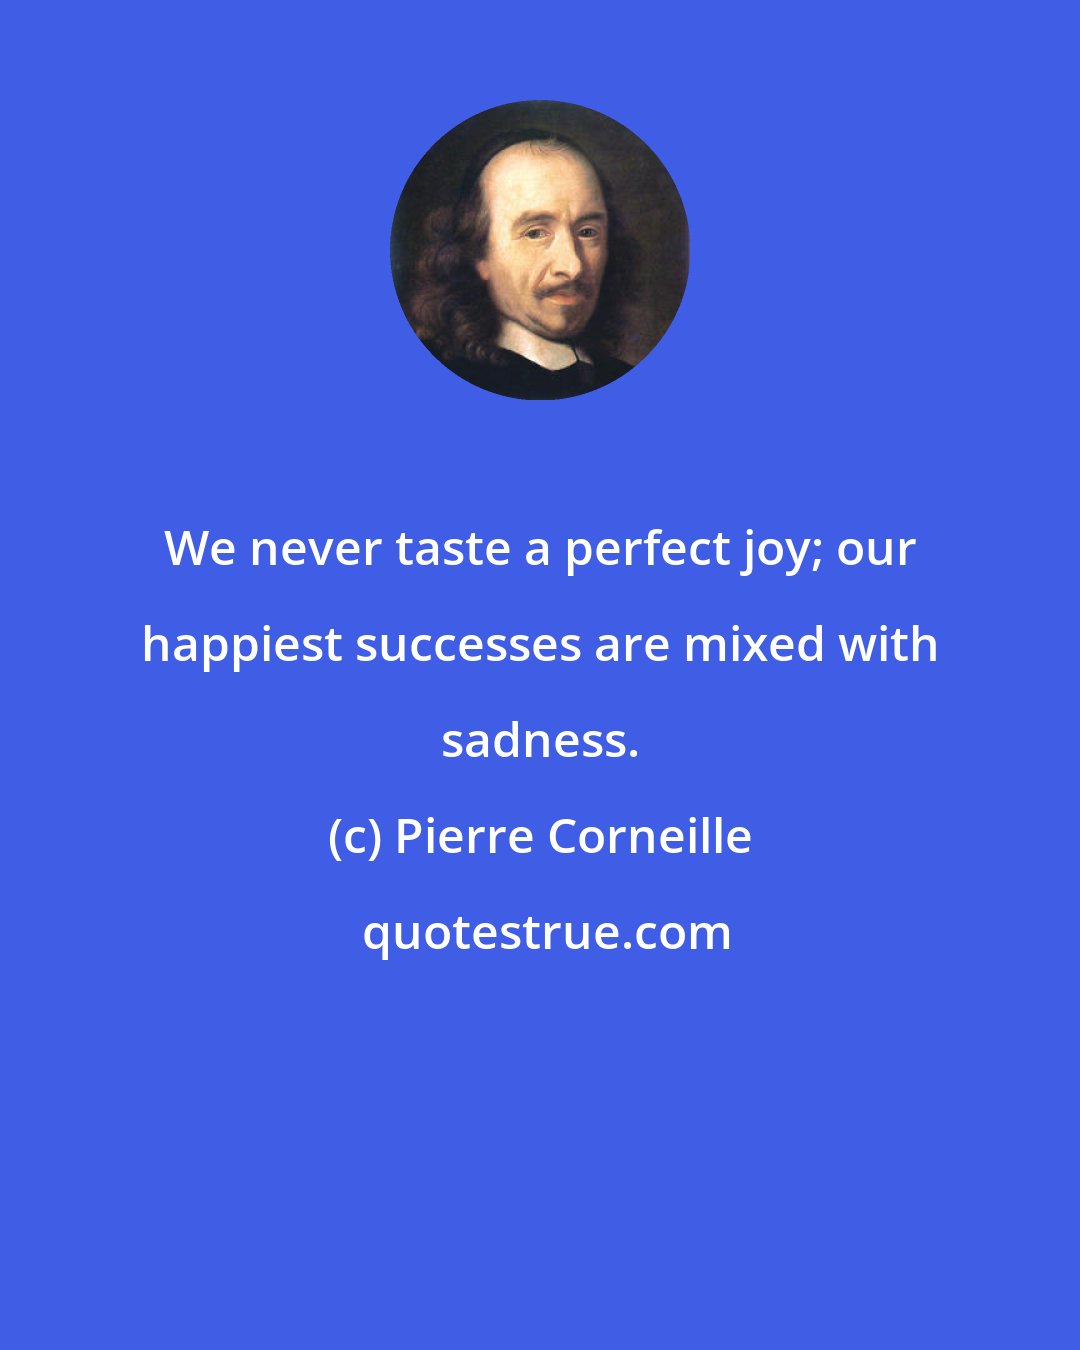 Pierre Corneille: We never taste a perfect joy; our happiest successes are mixed with sadness.